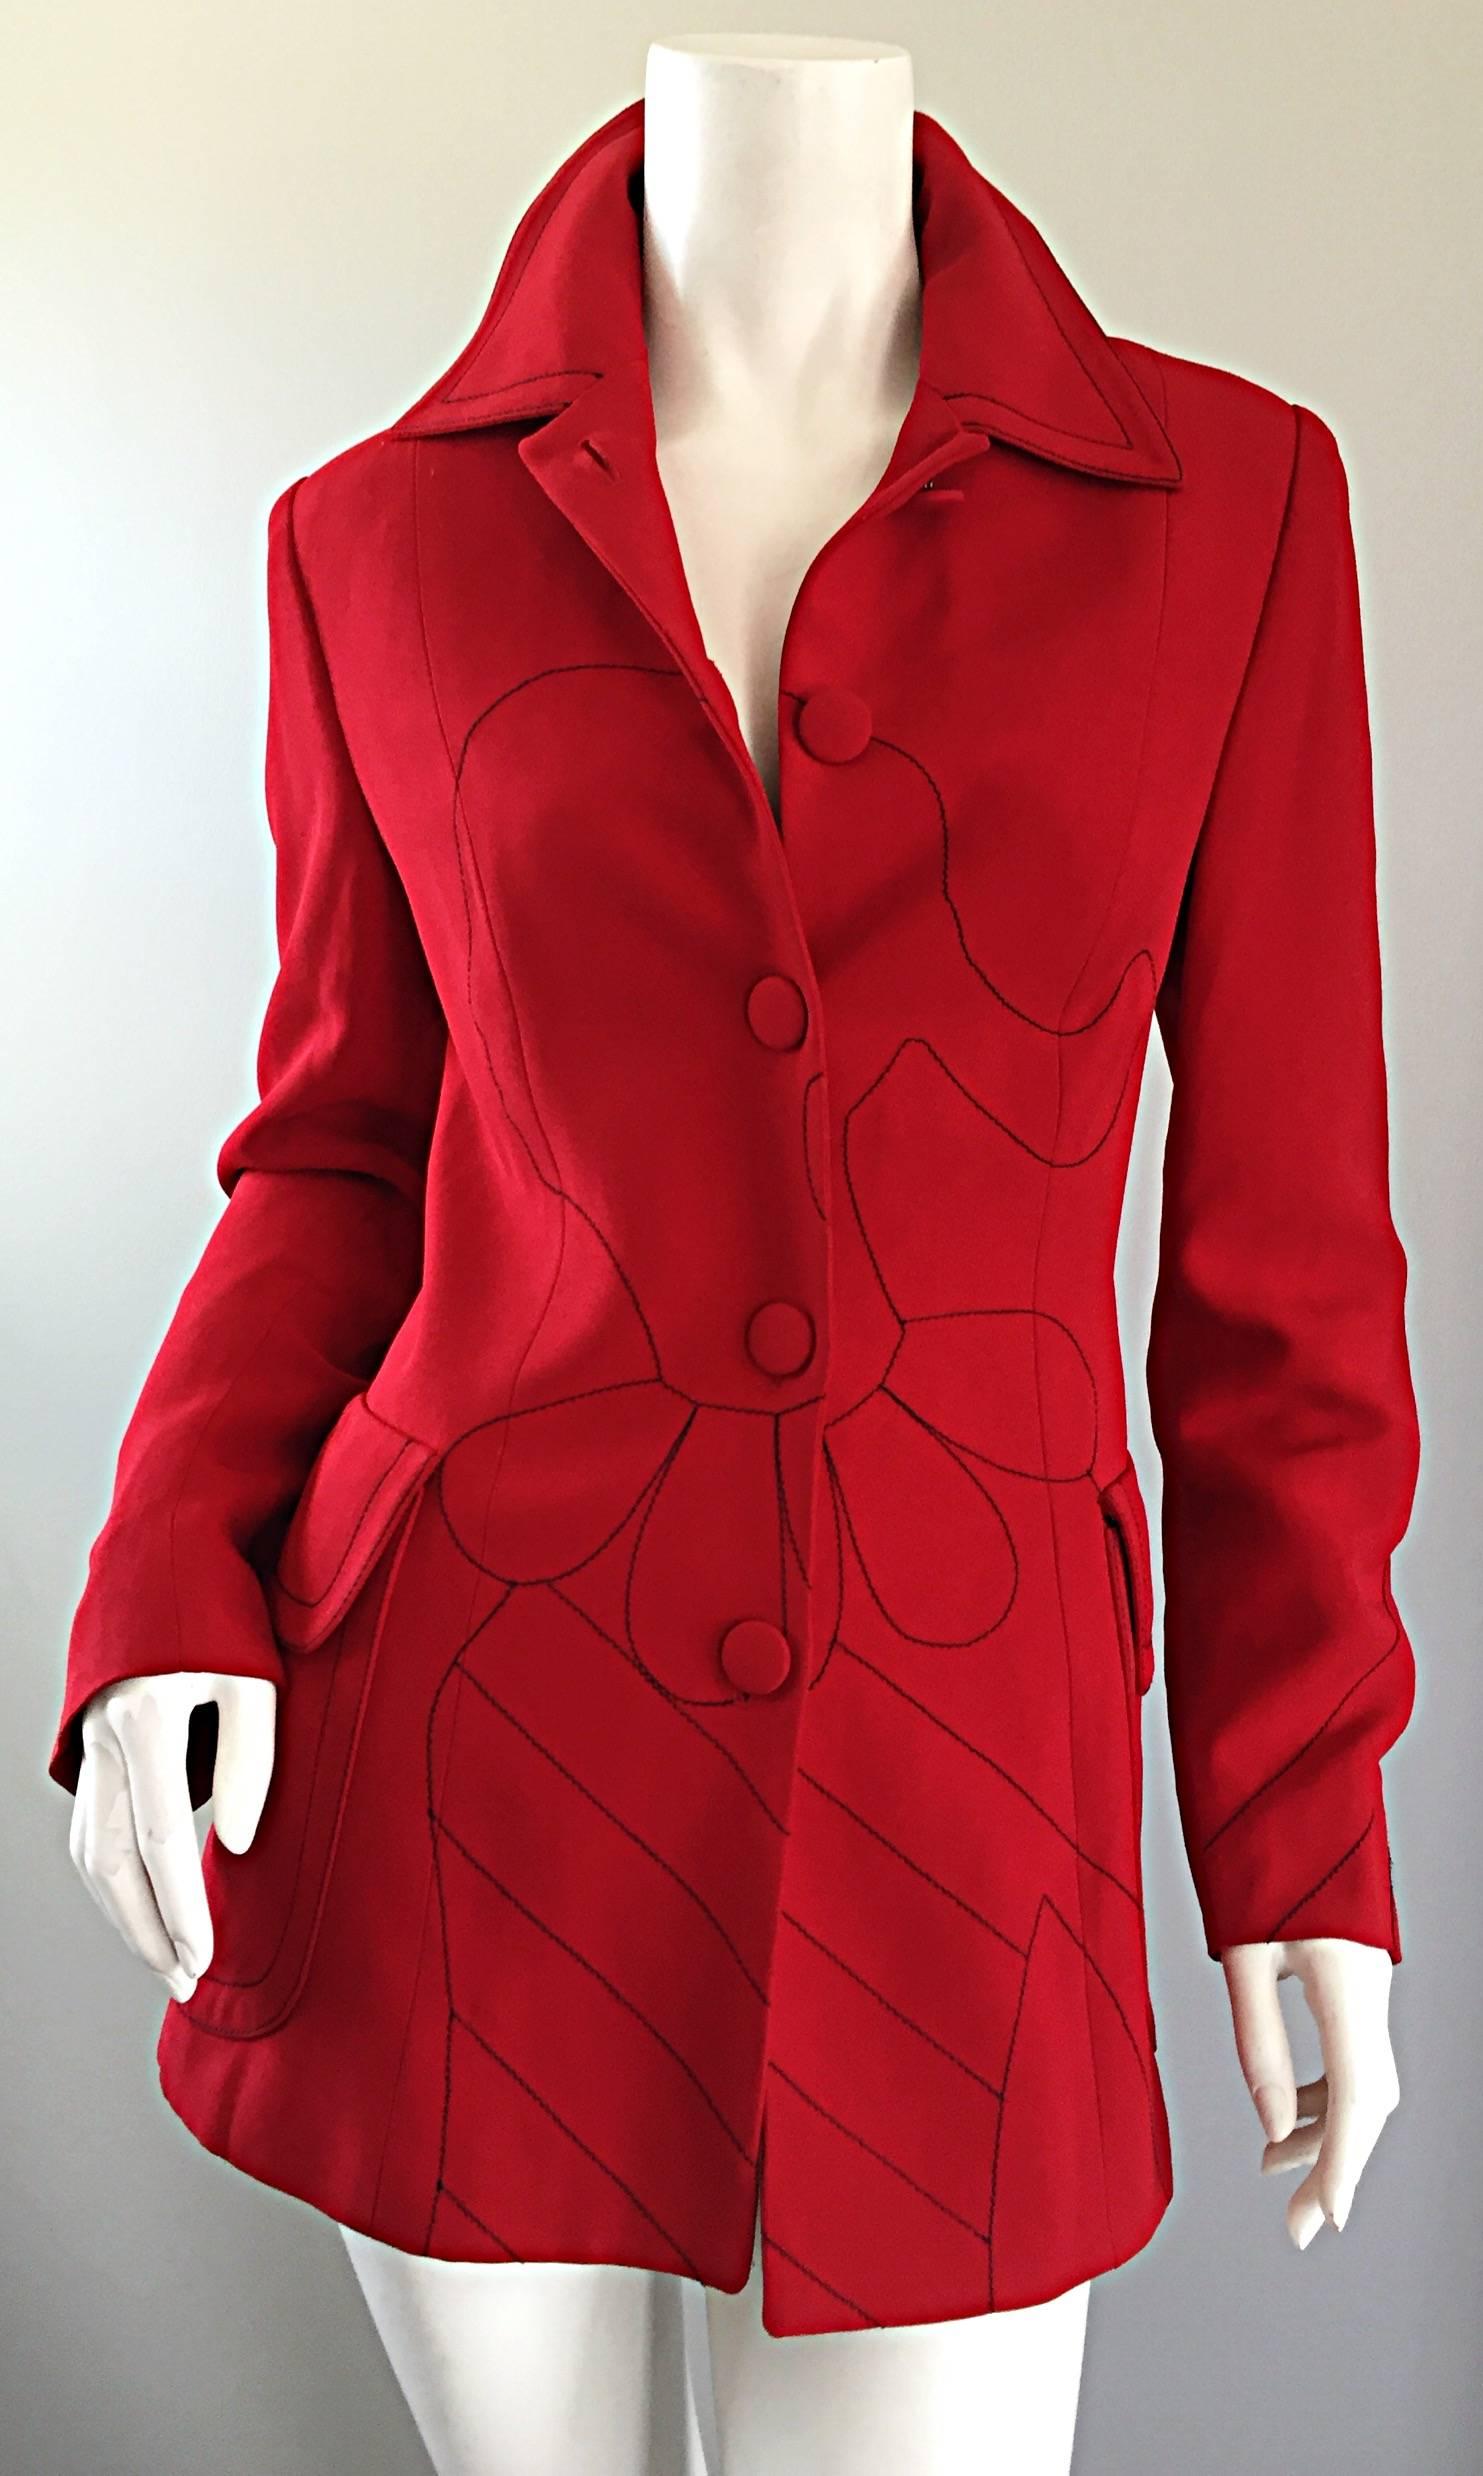 Rare 90s MOSCHINO 'Cheap and Chic' lipstick red blazer! Features an embroidered silhouette of Olive Oyl (Popeye's wife) on the front, and the word 